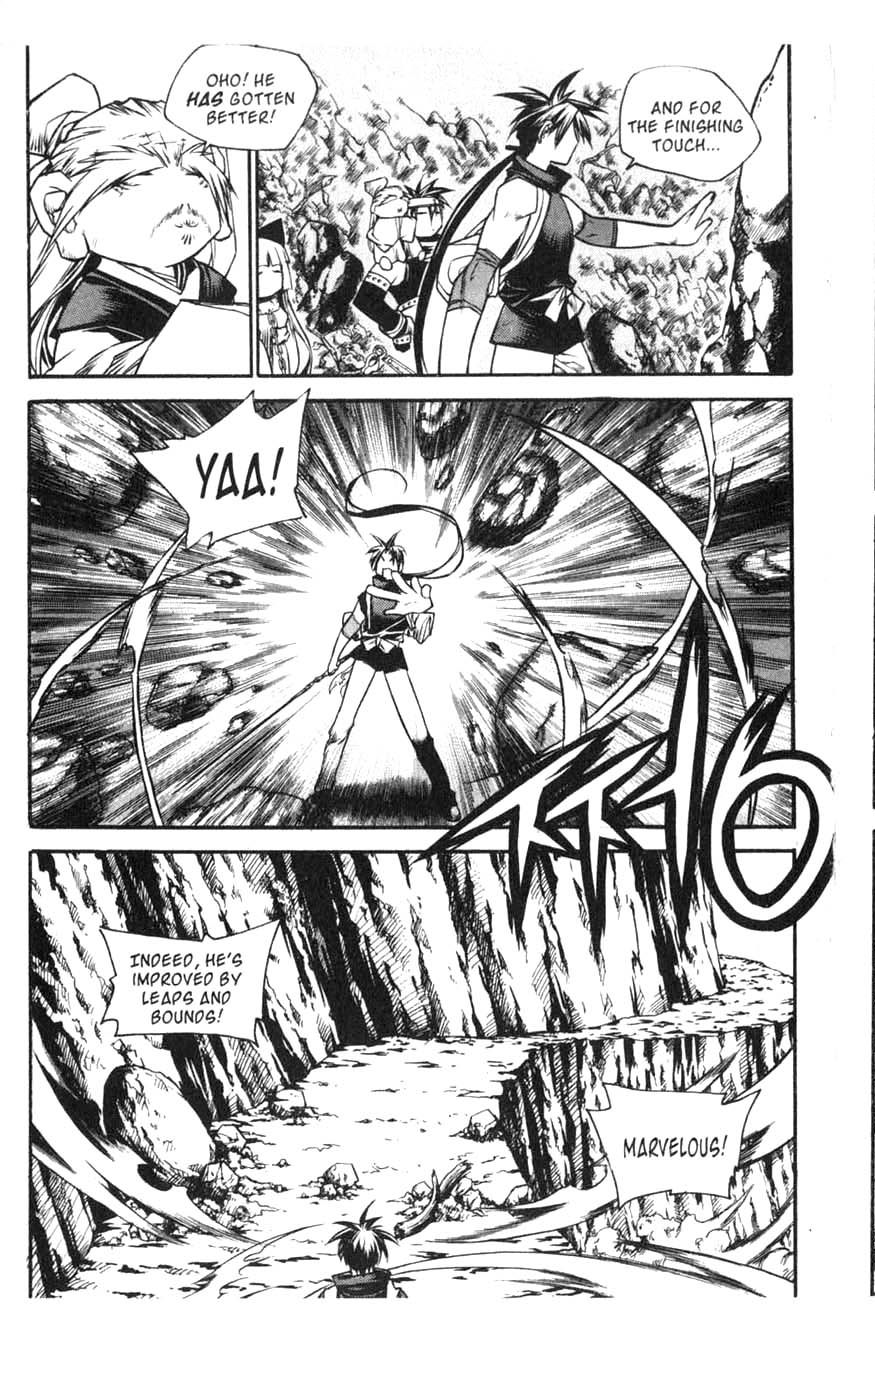 Chronicles of the Cursed Sword Vol. 15 Ch. 61 Sages' Defeat